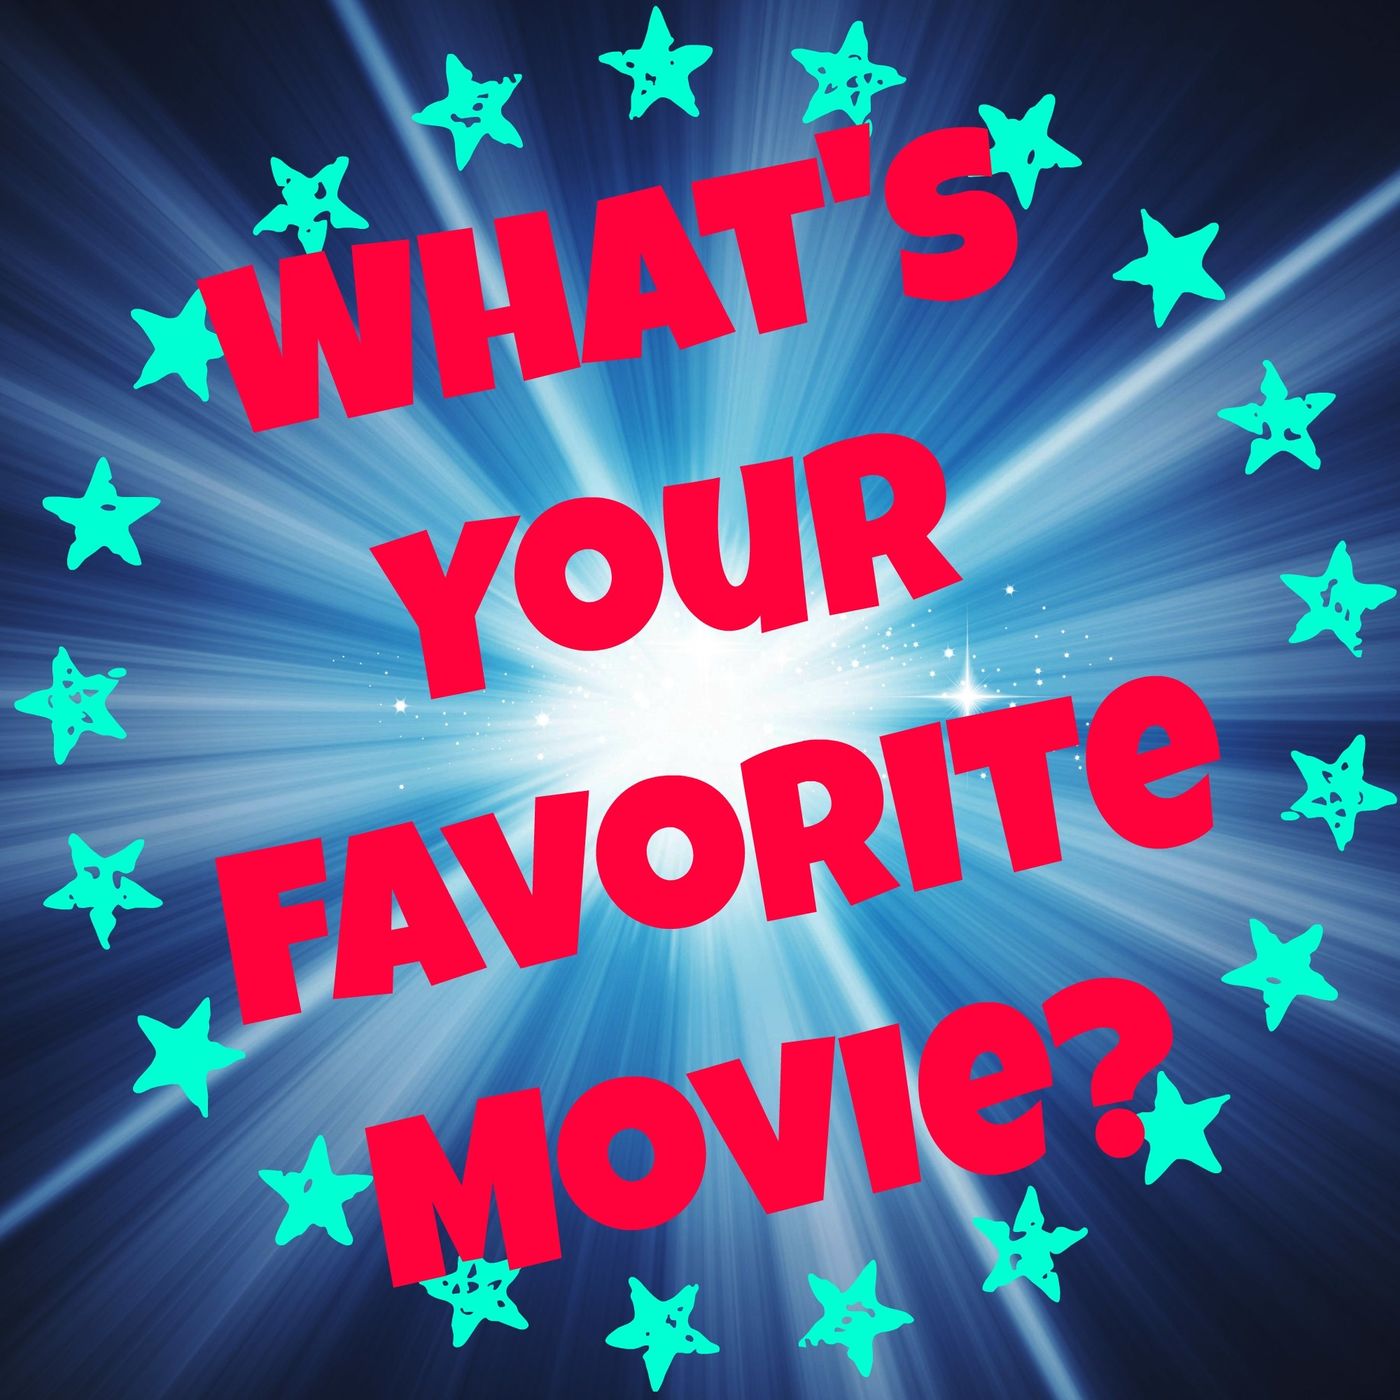 What’s Your Favorite Movie?